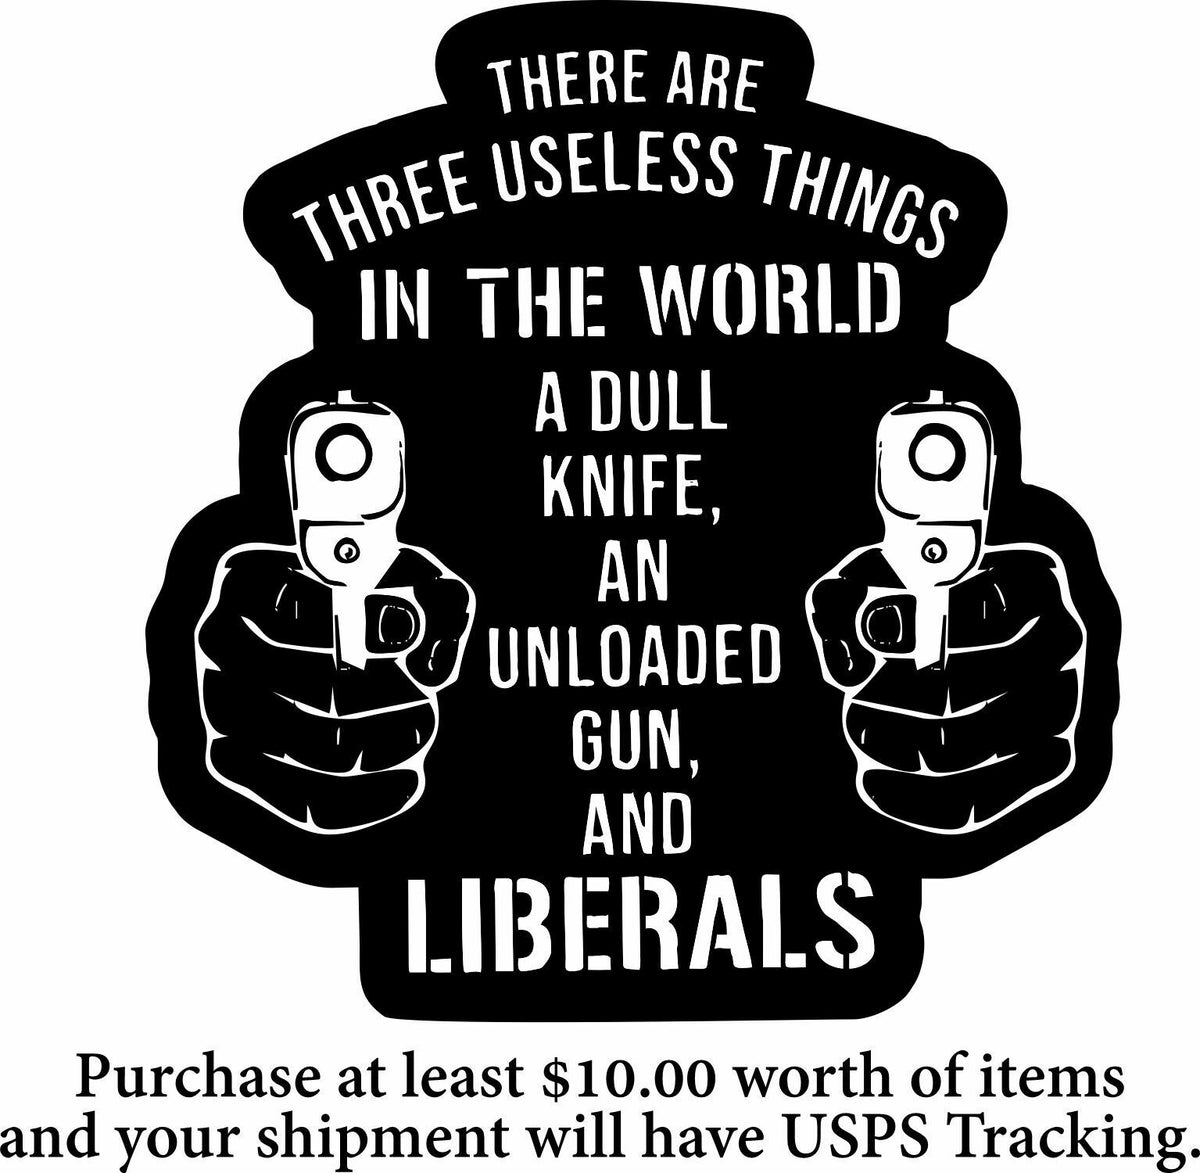 Liberals are Useless Window Sticker Useless things in the world - Various Sizes - Powercall Sirens LLC